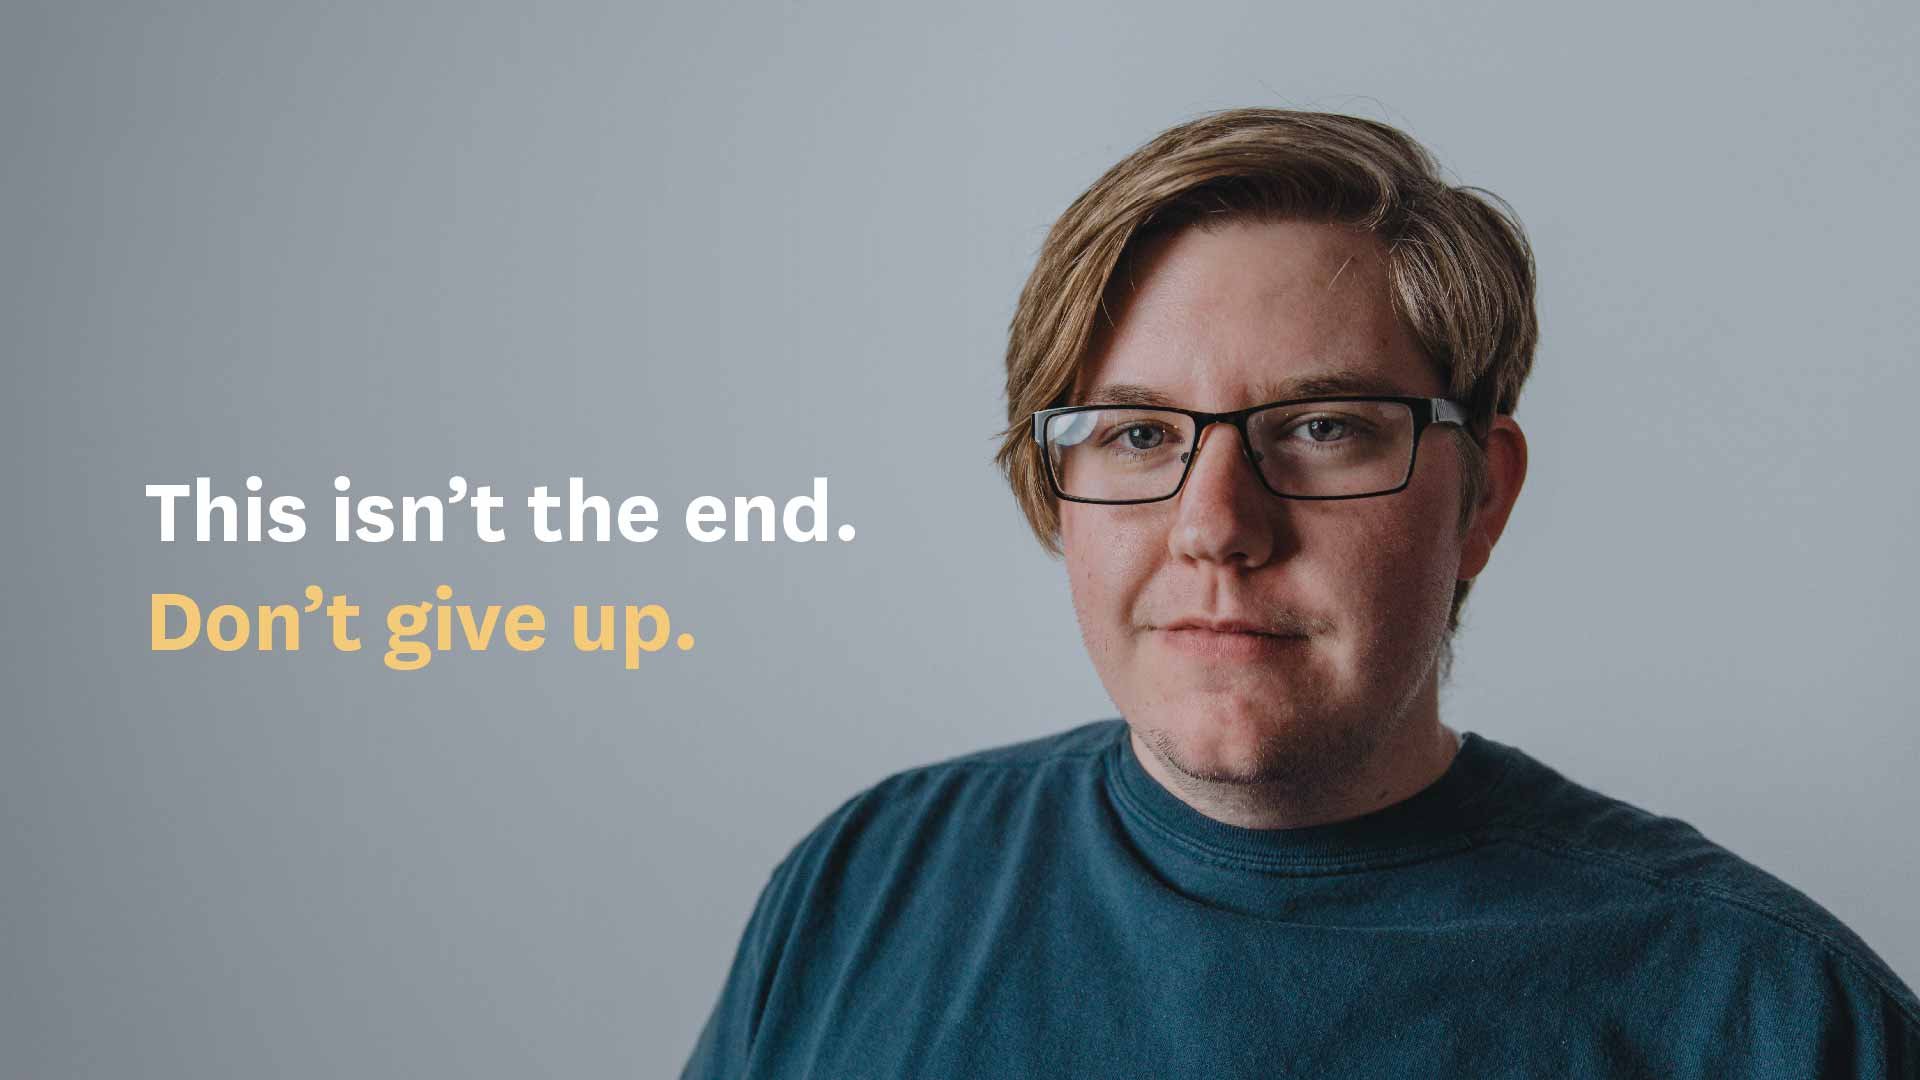 This isn't the end. Don't give up.